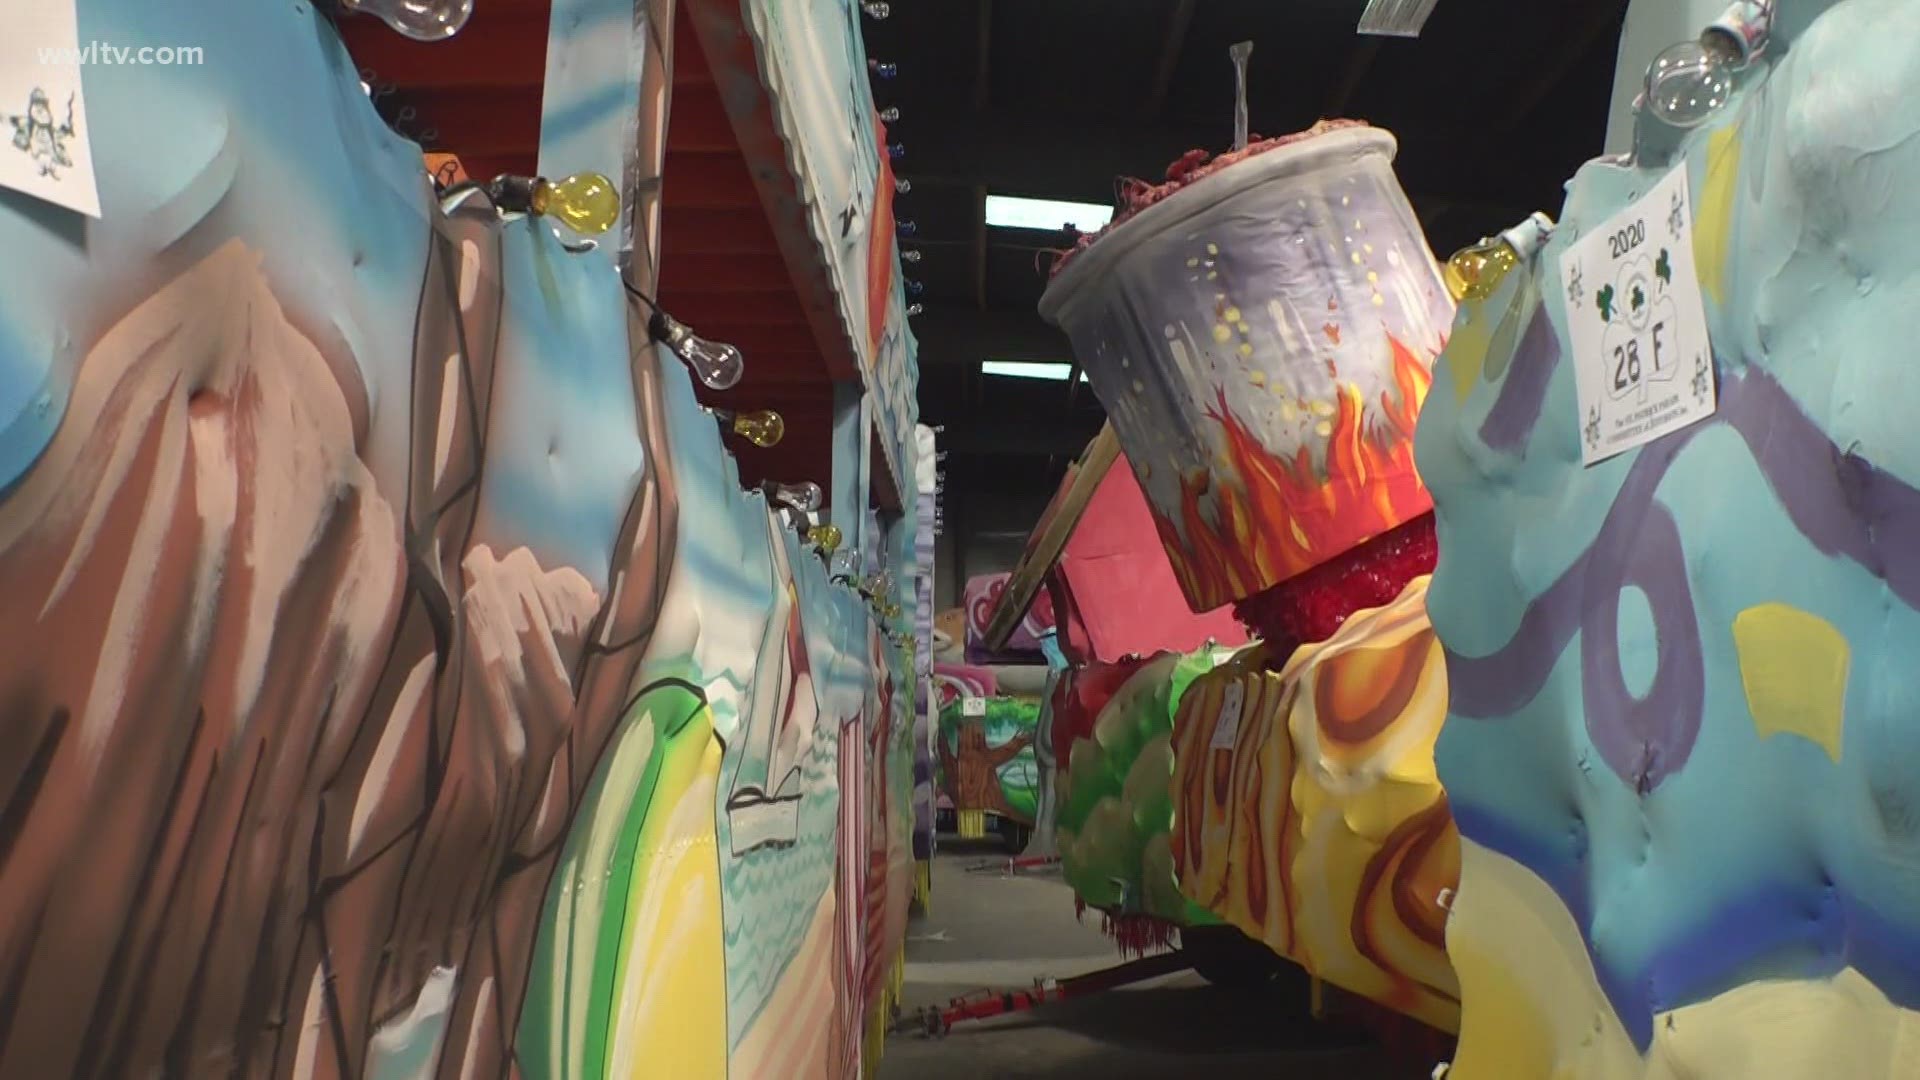 Jefferson Parish hoped to move its Mardi Gras parades to May to keep some of the Carnival money, but that hope is now gone.